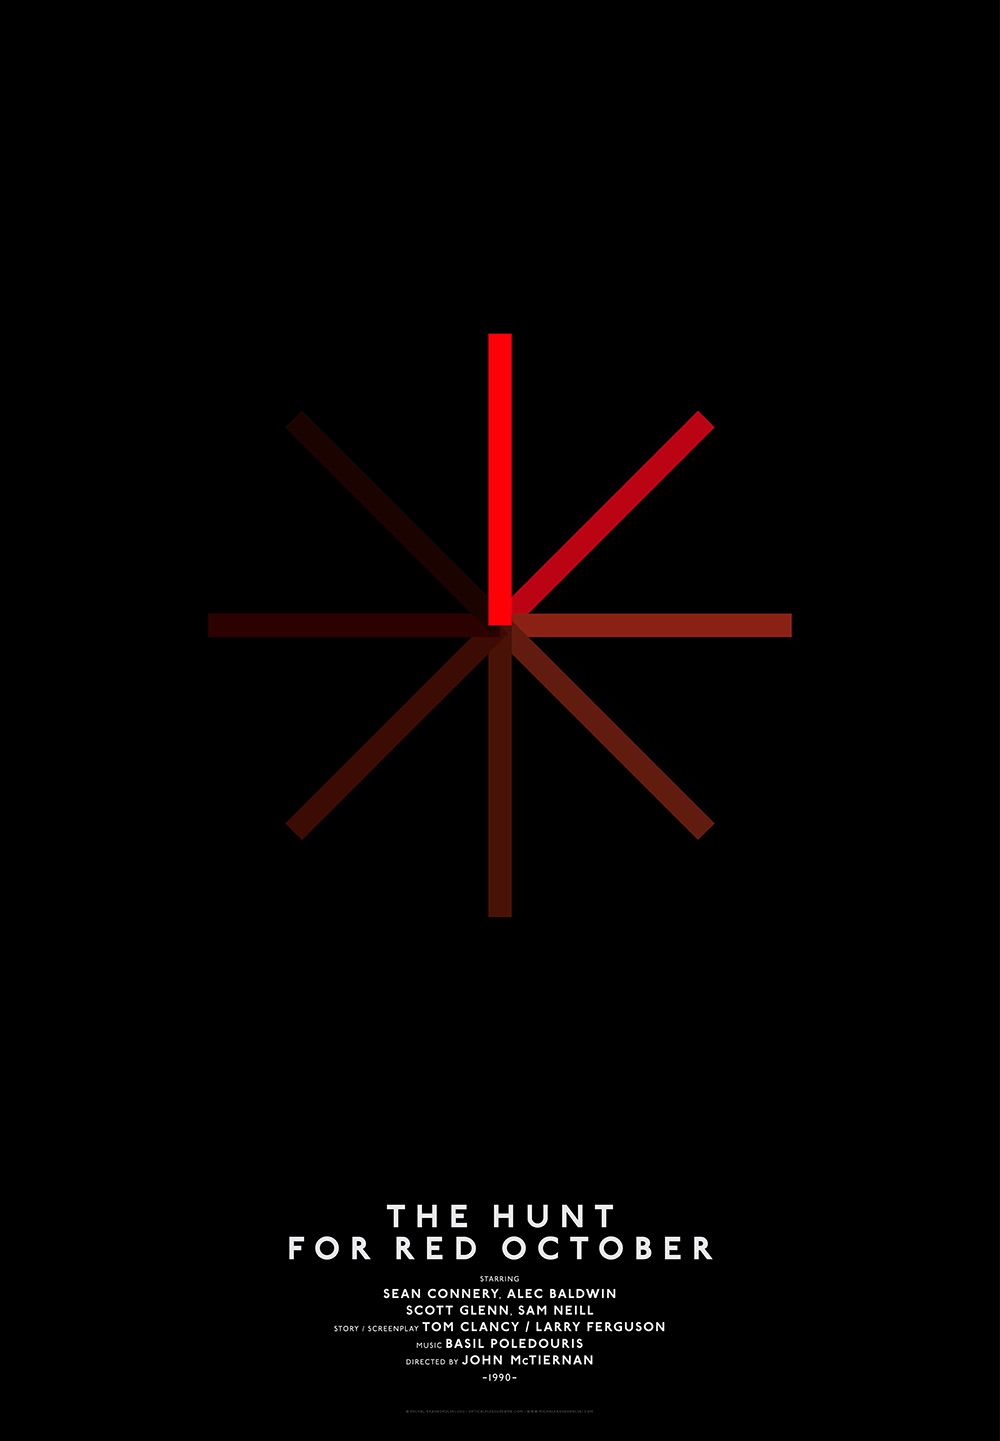 movie poster for The Hunt for Red October featuring a red circular display that looks like sonar